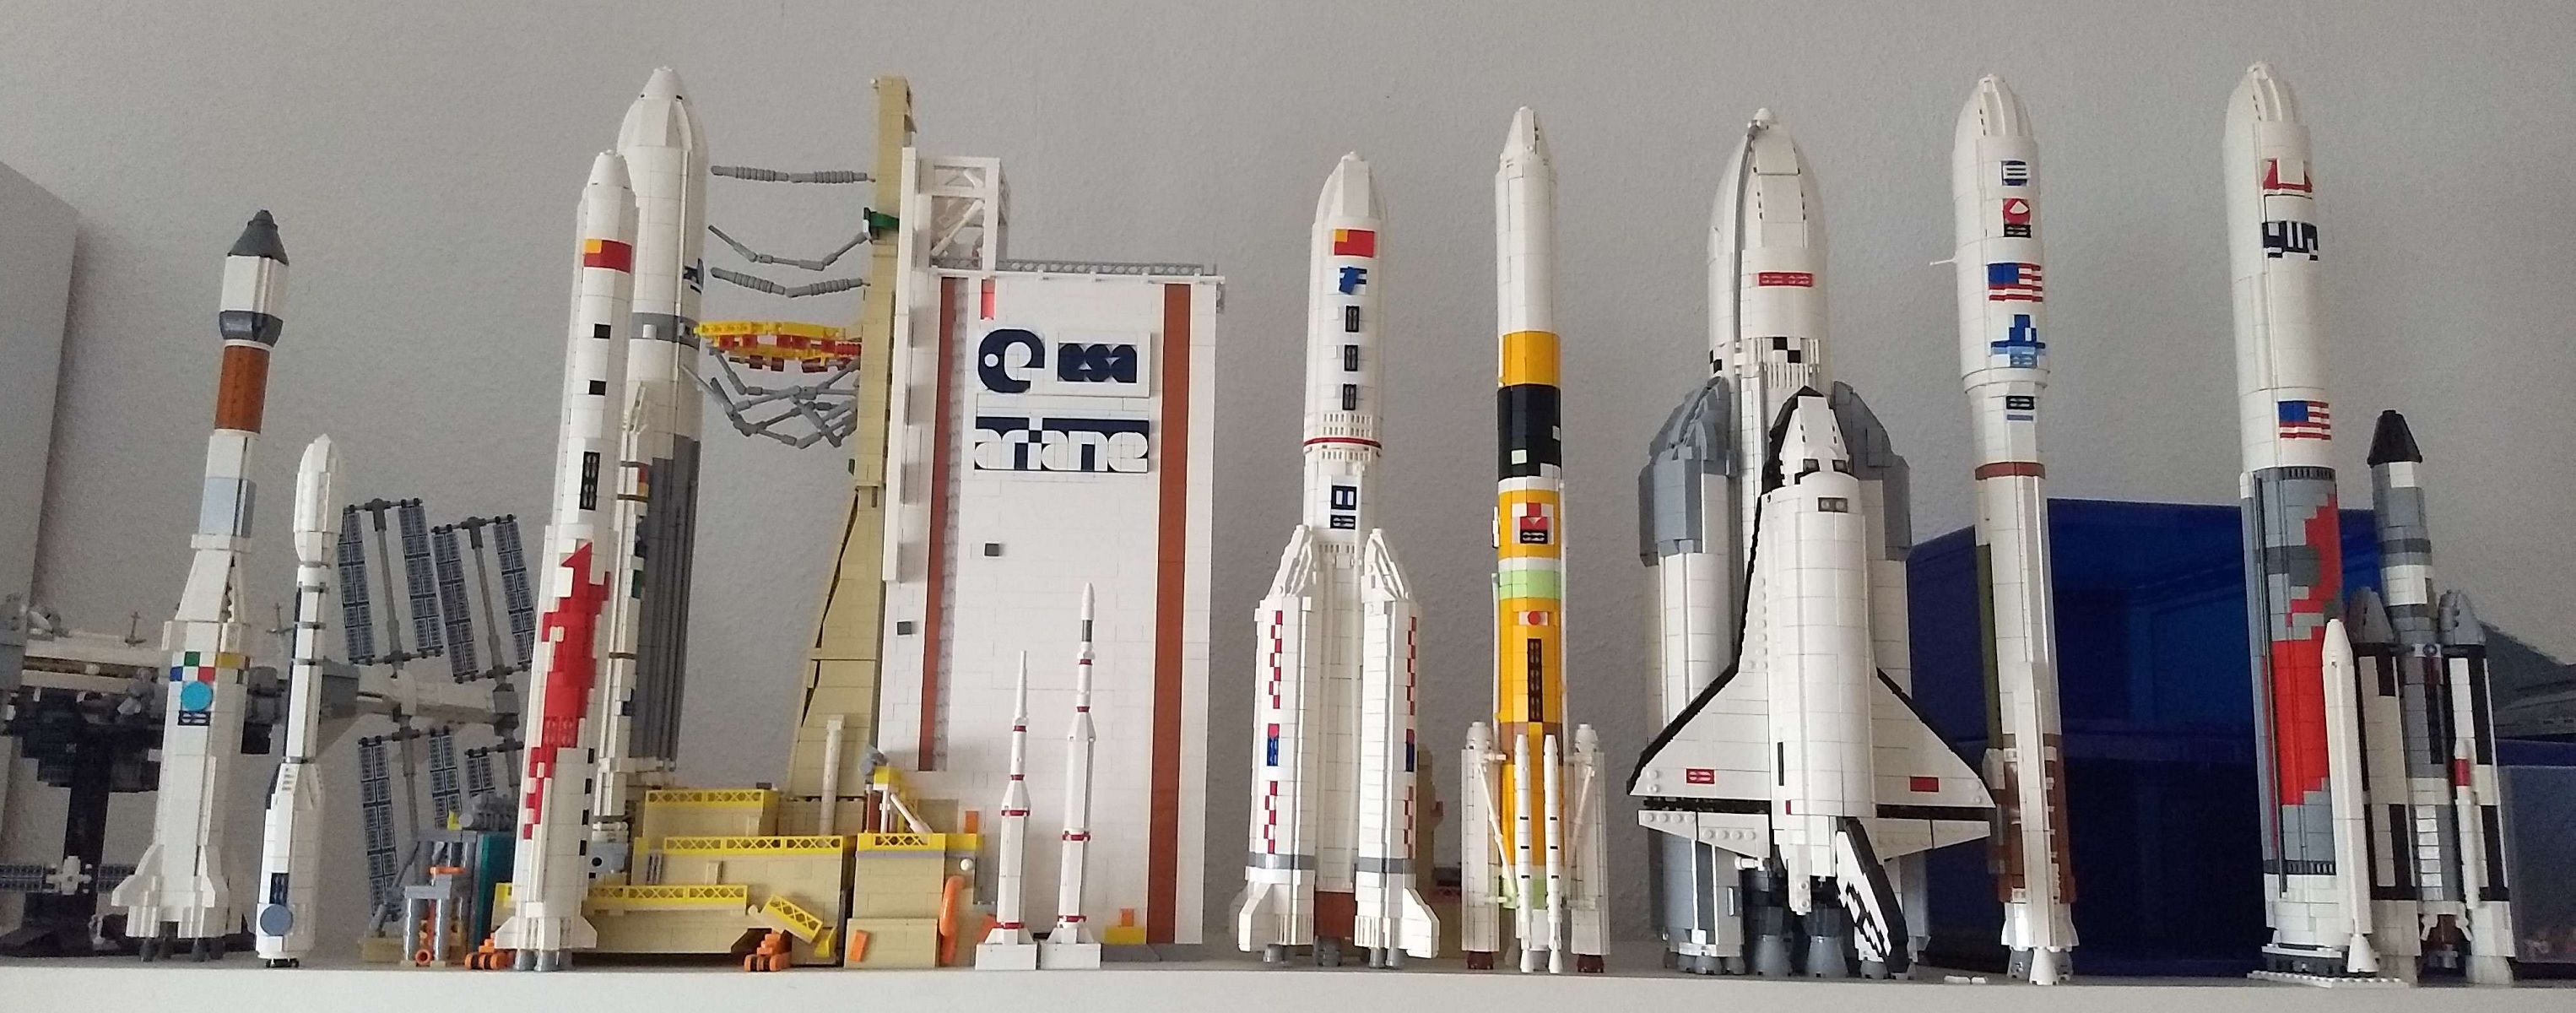 A part of my collection of rocket mocs